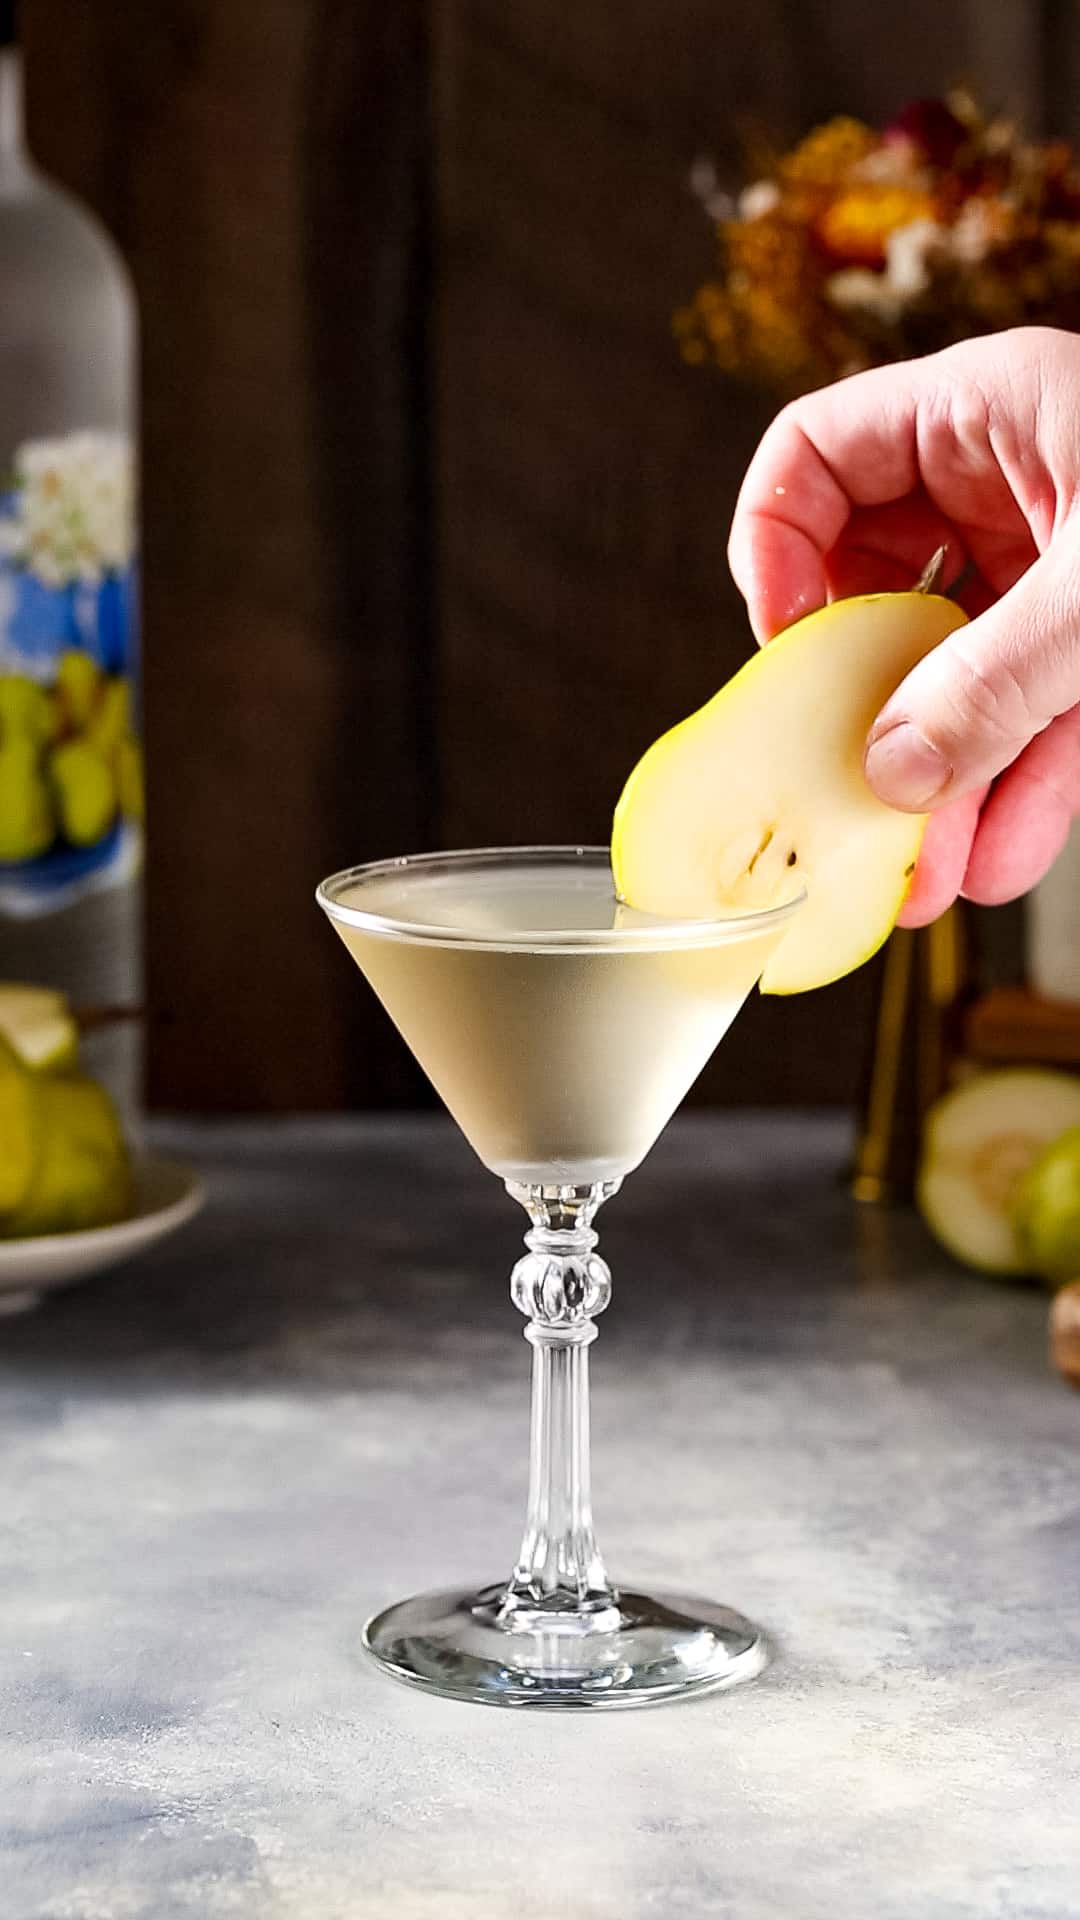 Hand adding a fresh pear slice to the rim of a martini glass filled with a light yellow liquid as a garnish.